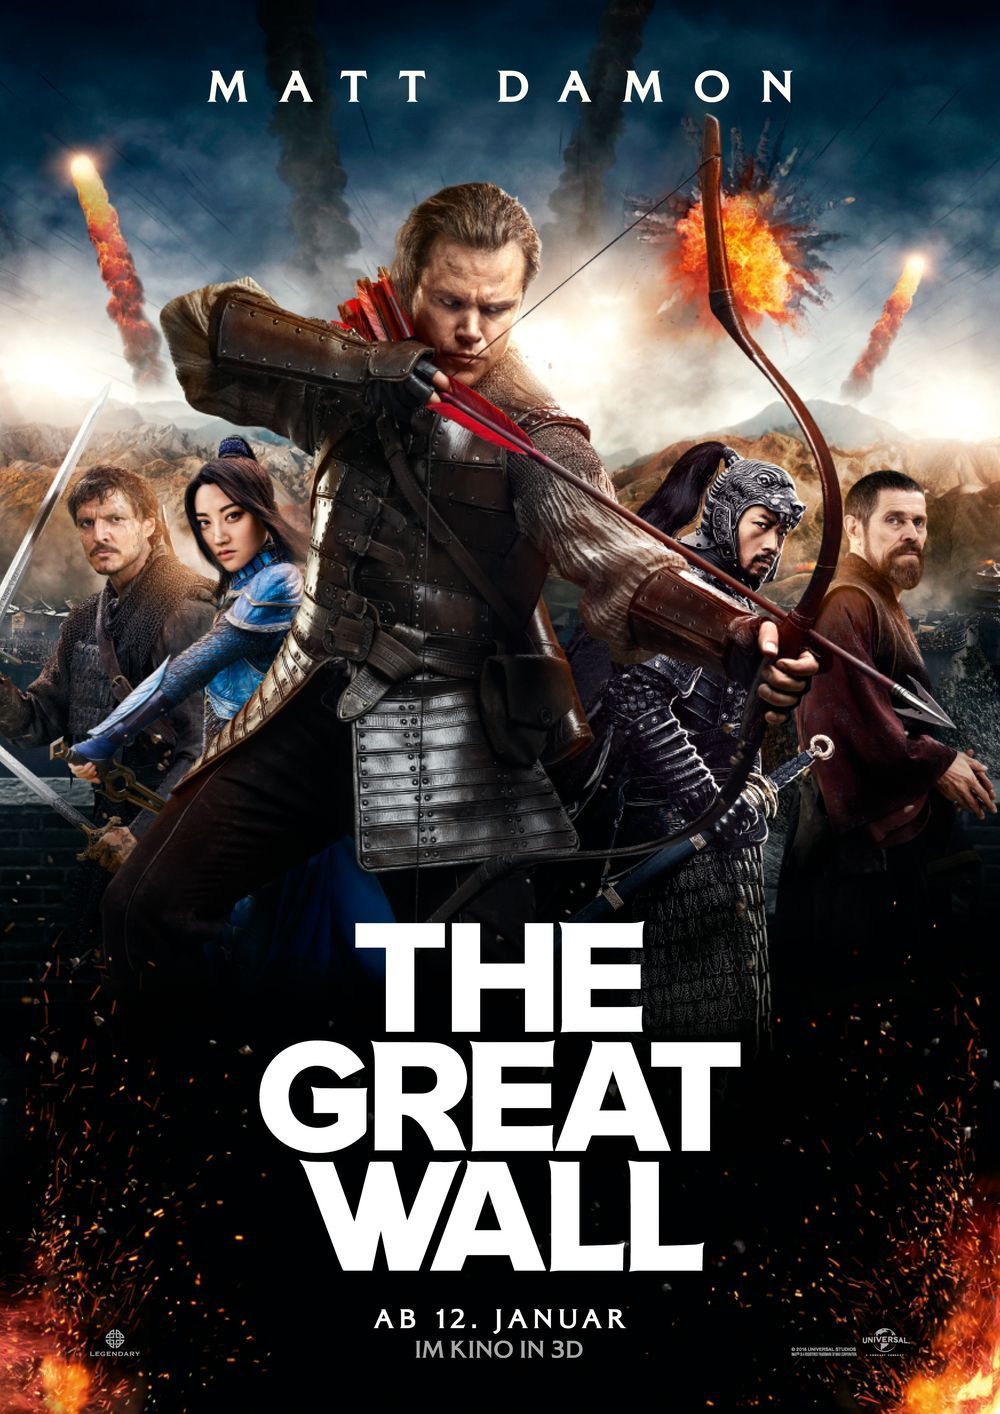 FOX ACTION MOVIES: THE GREAT WALL